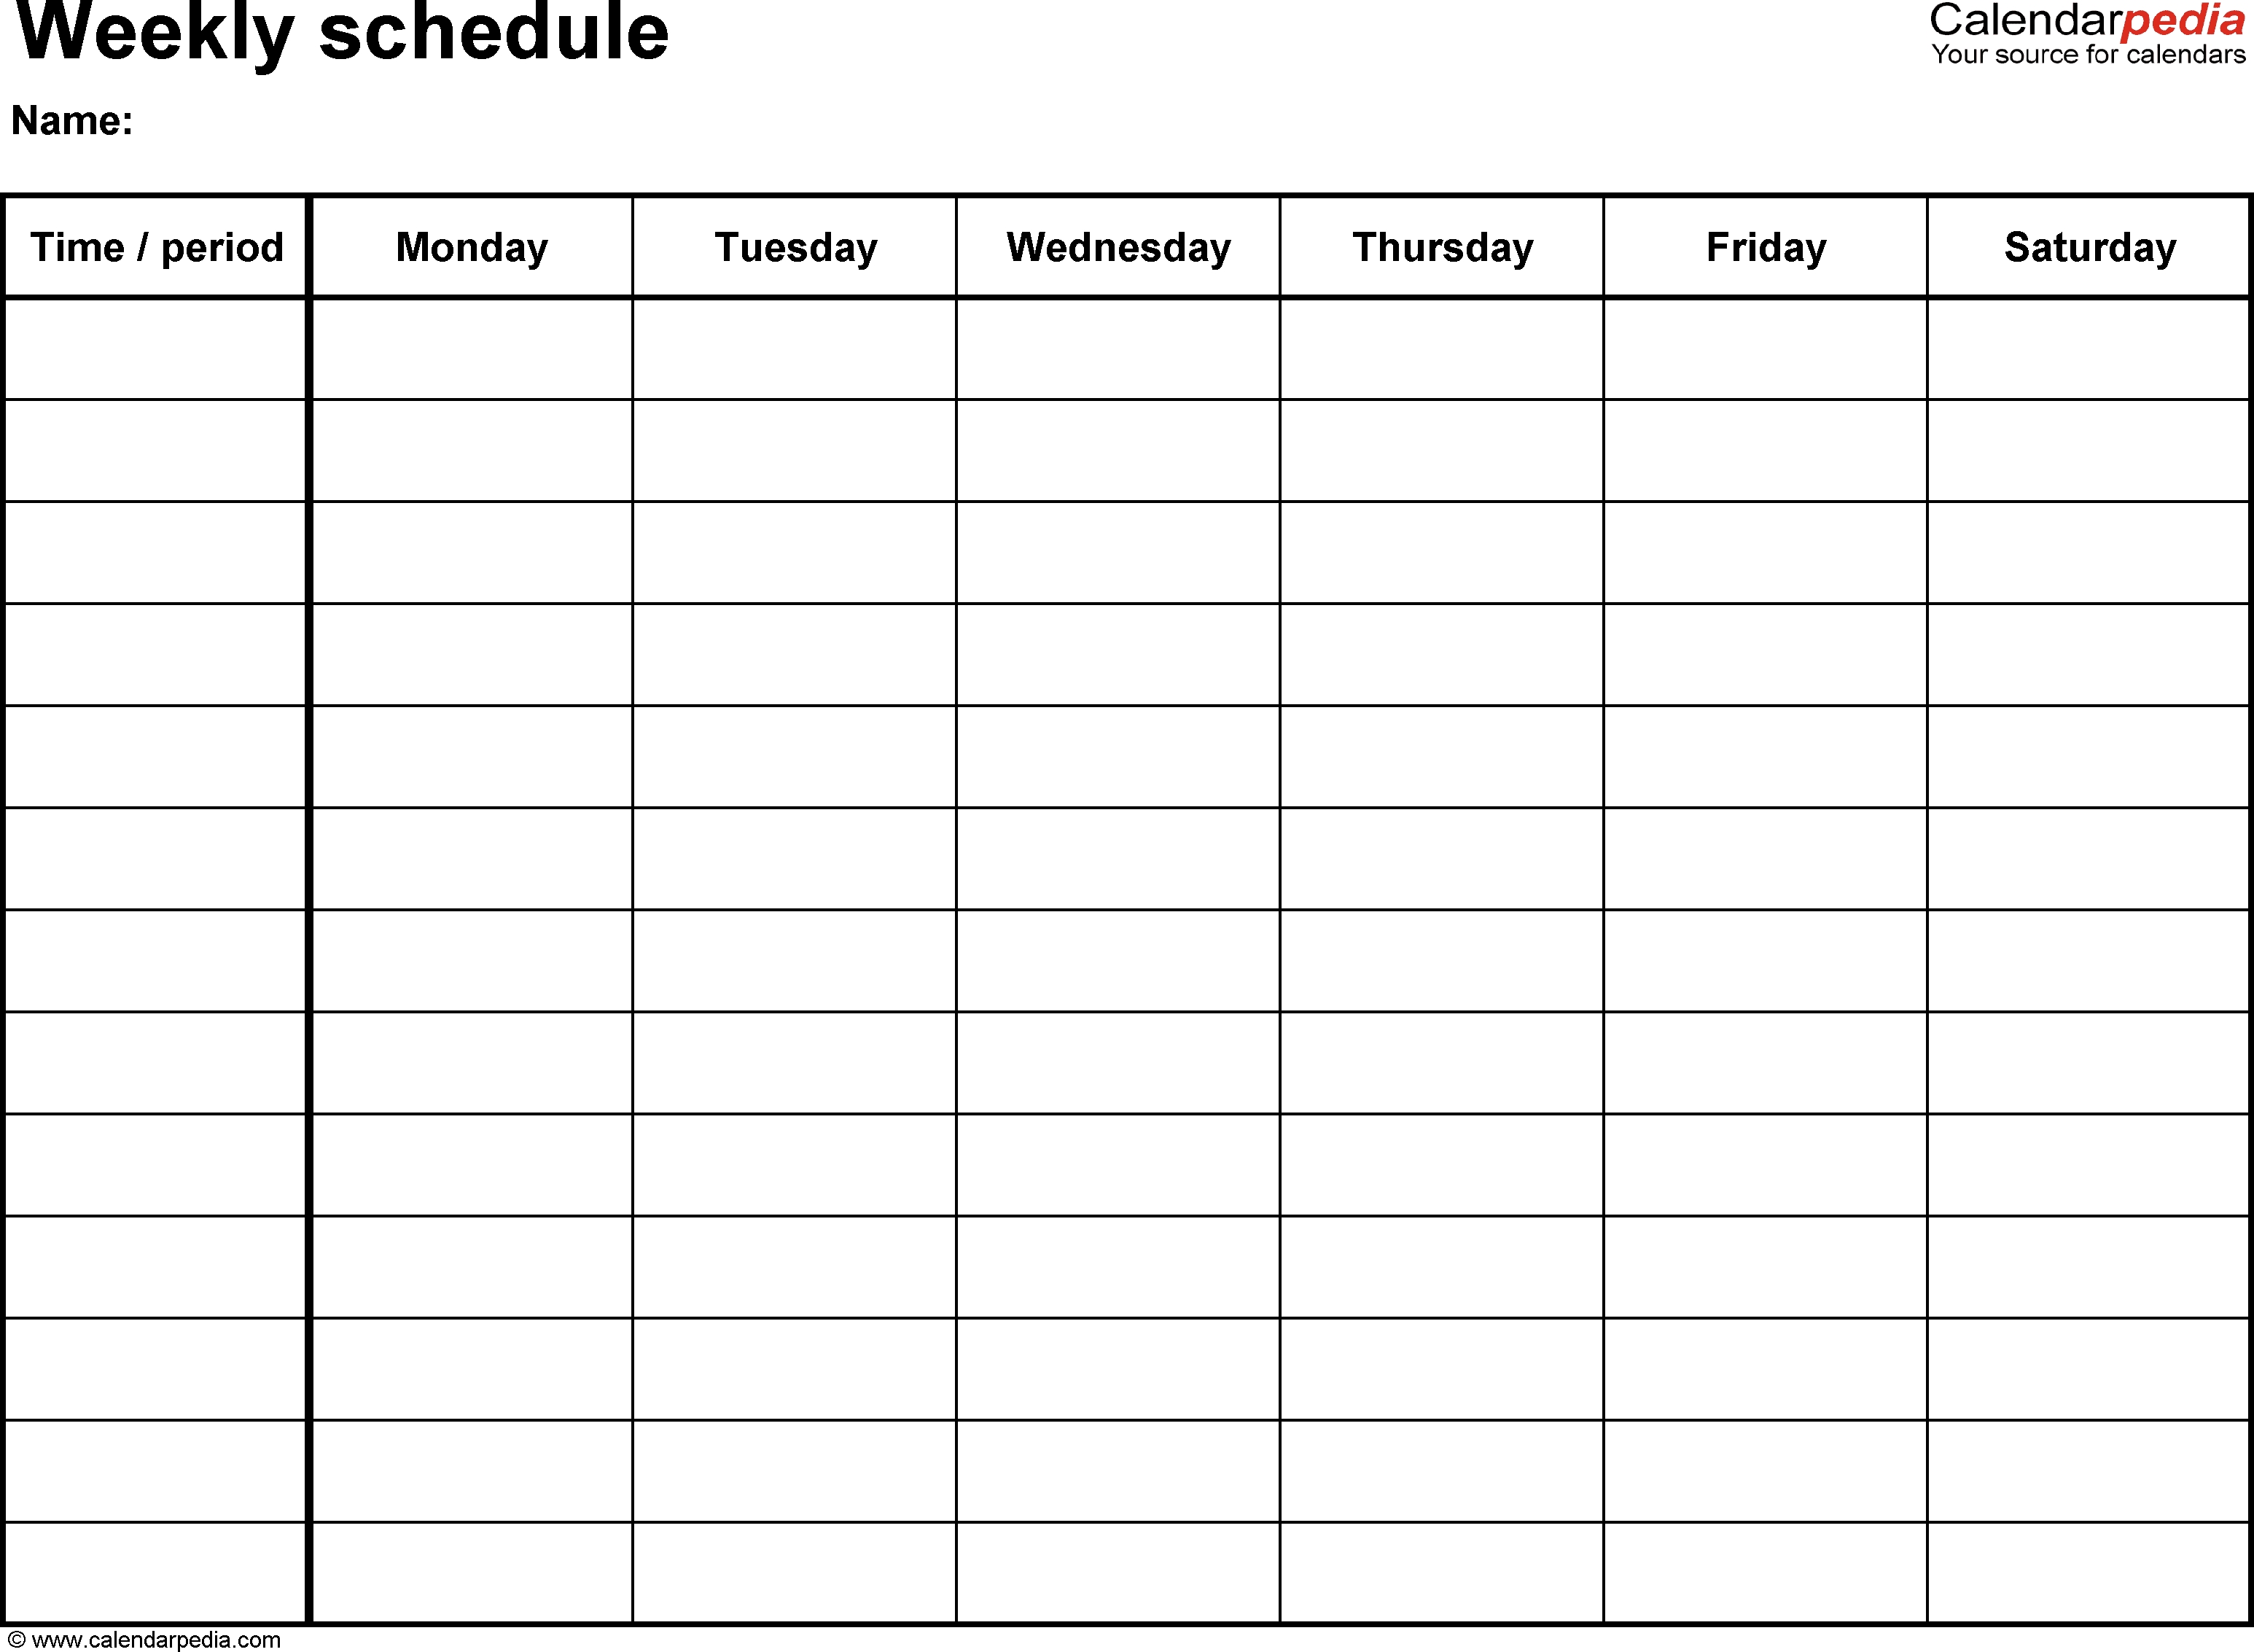 Free Weekly Schedule Templates For Excel - 18 Templates for 7 Day 15 Minute Schedule